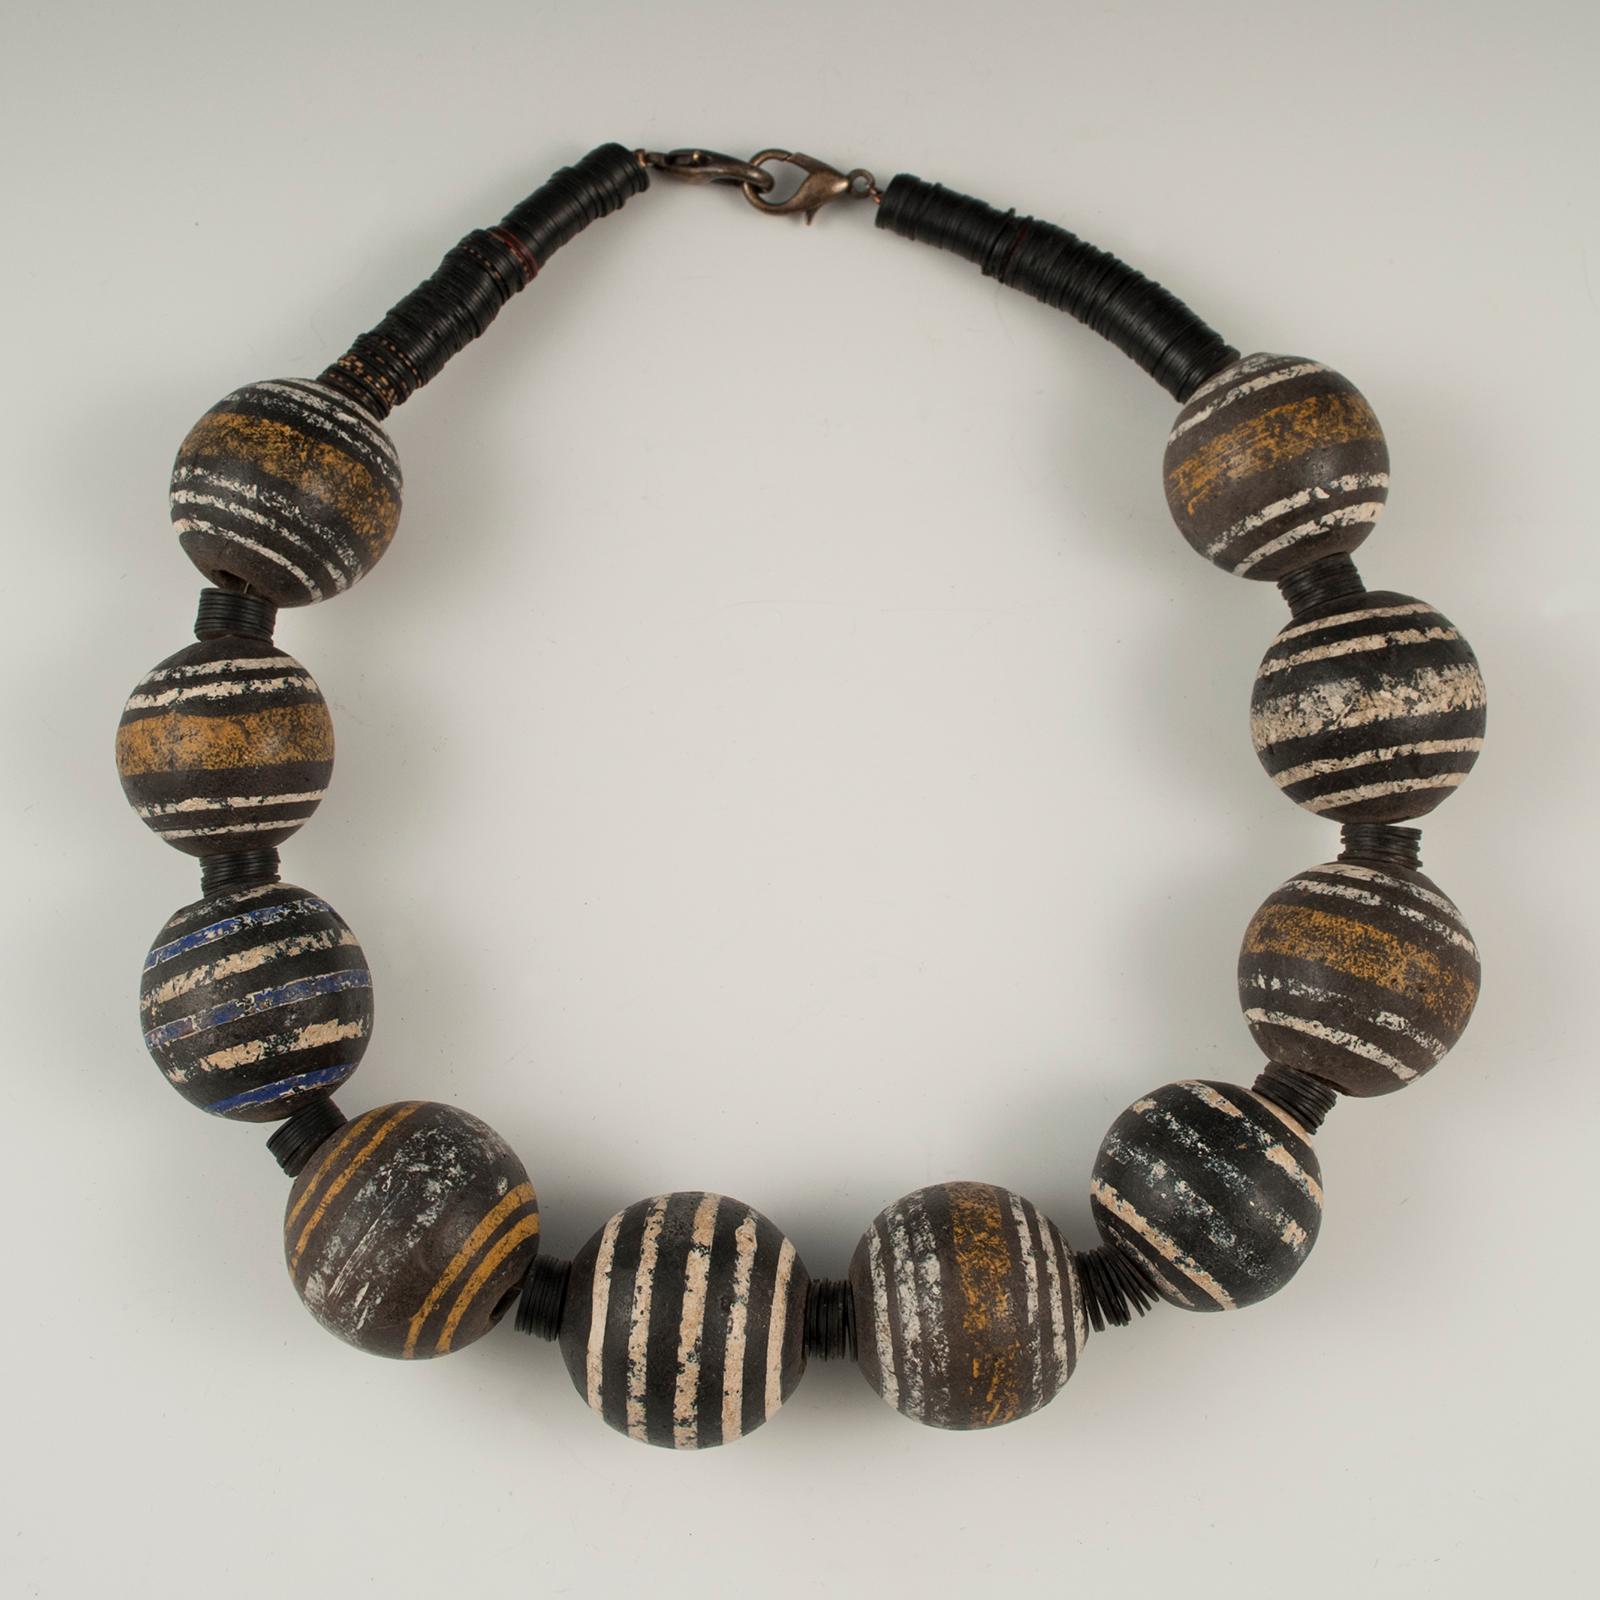 Malian Large Mali Terracotta Tribal Bead Necklace by Claire Ginioux, Paris, France For Sale